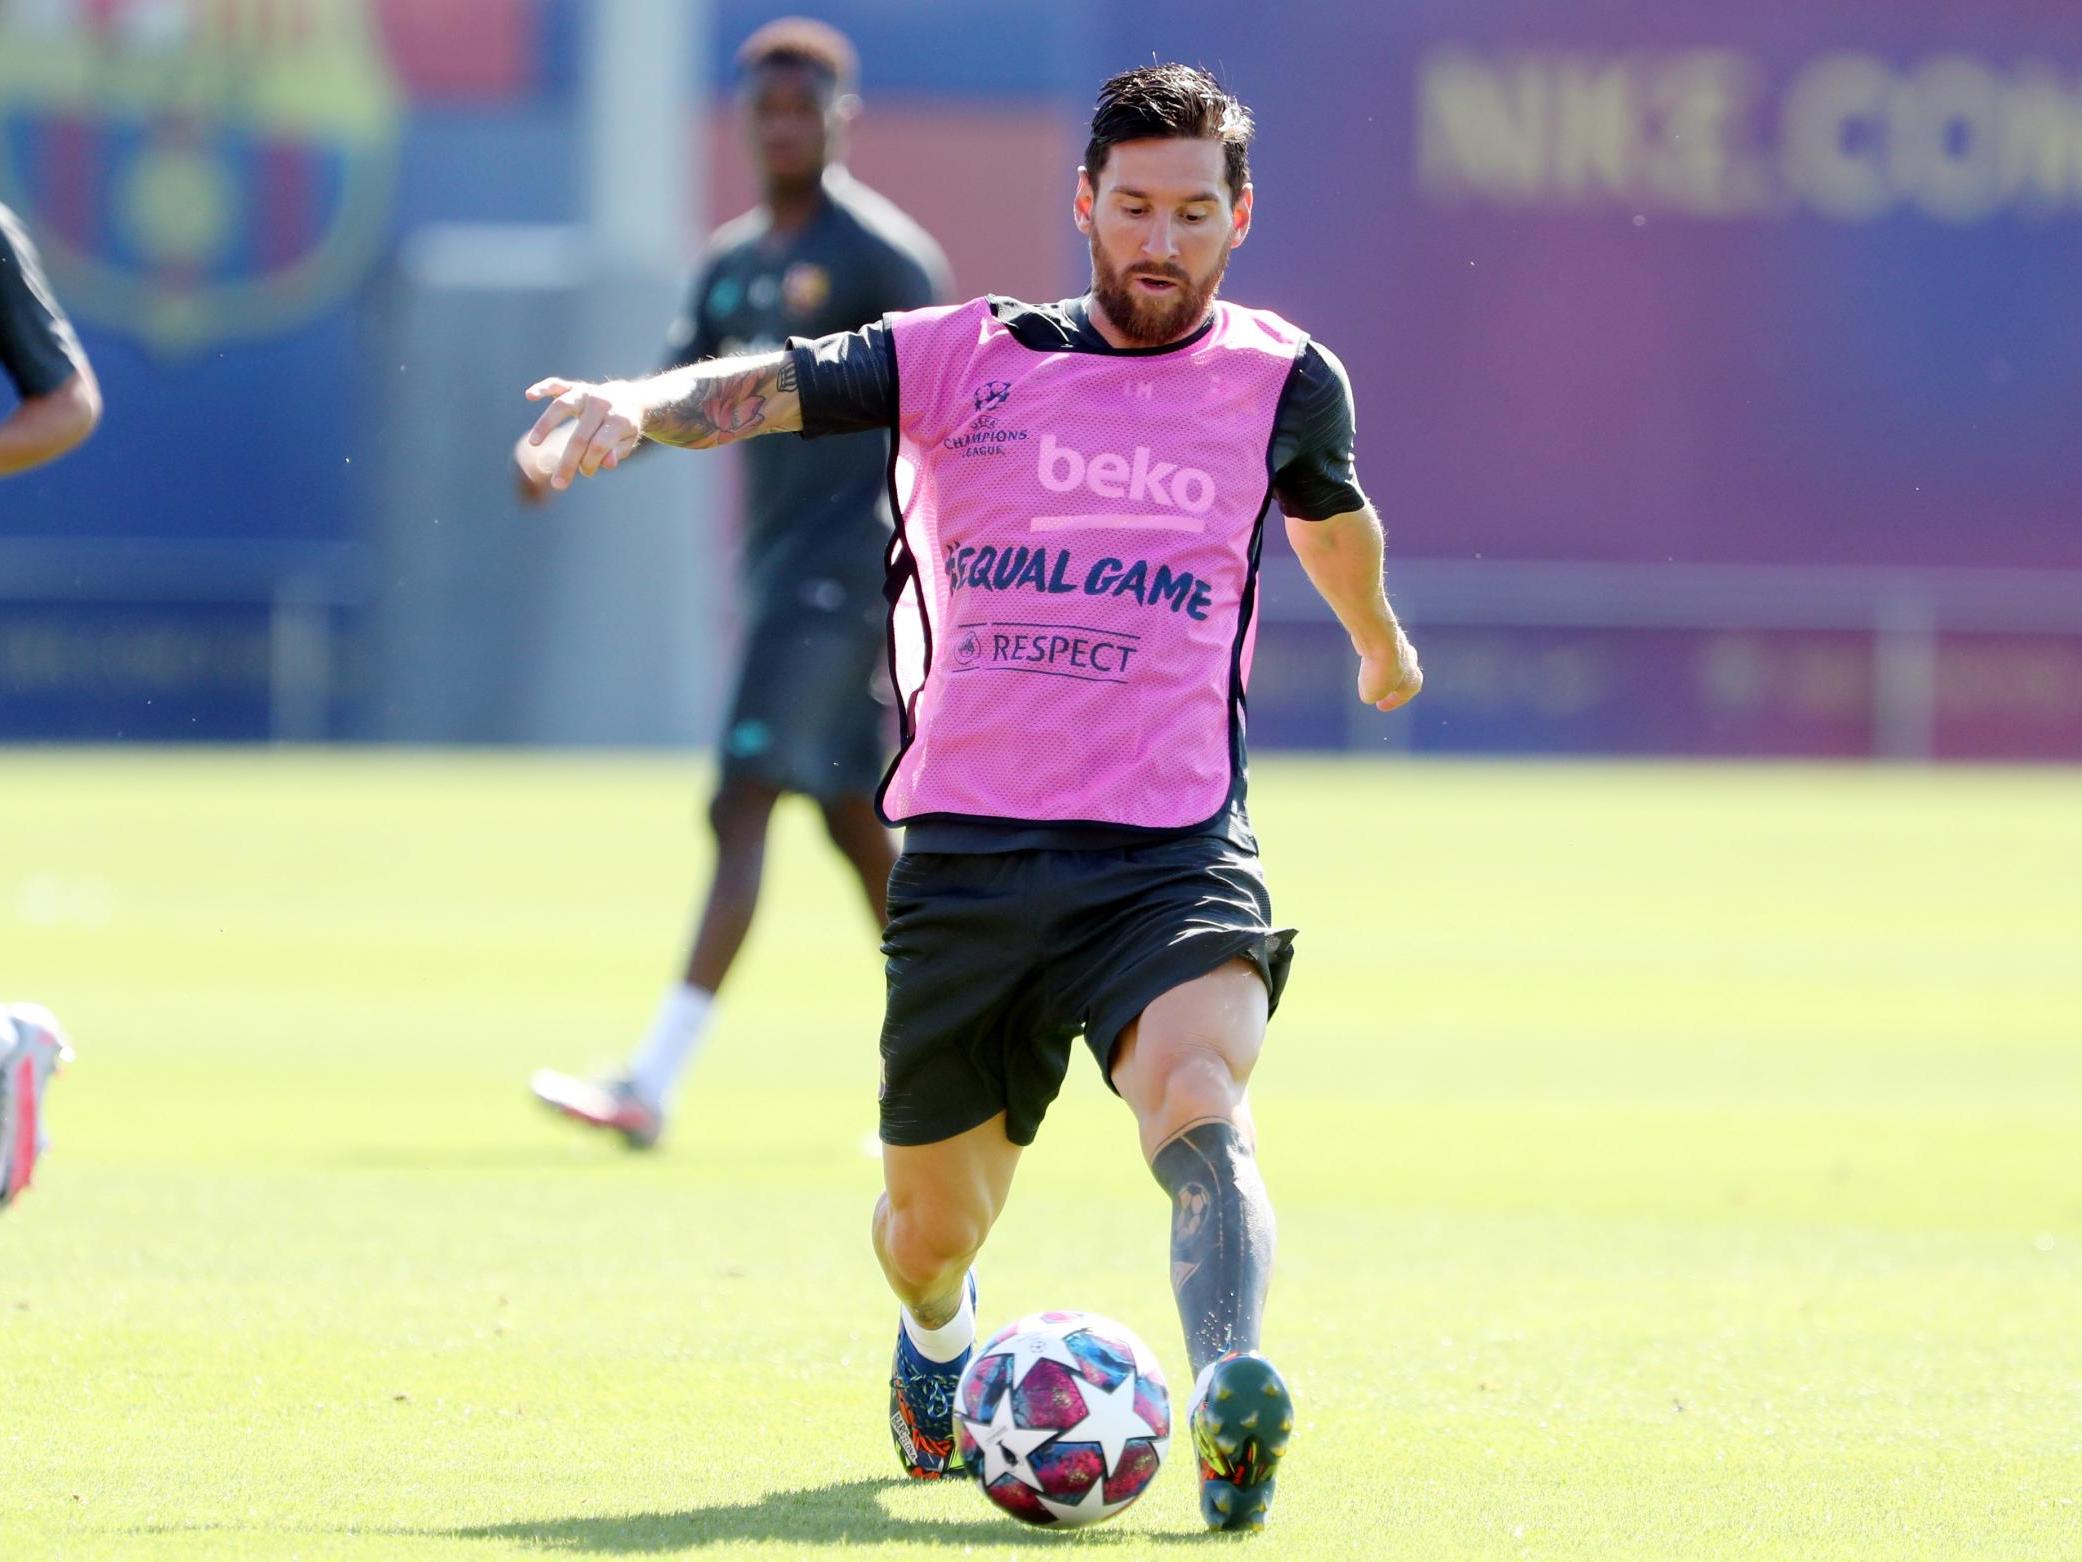 Barcelona vs Napoli LIVE: Team news, line-ups and more from Champions League fixture tonight